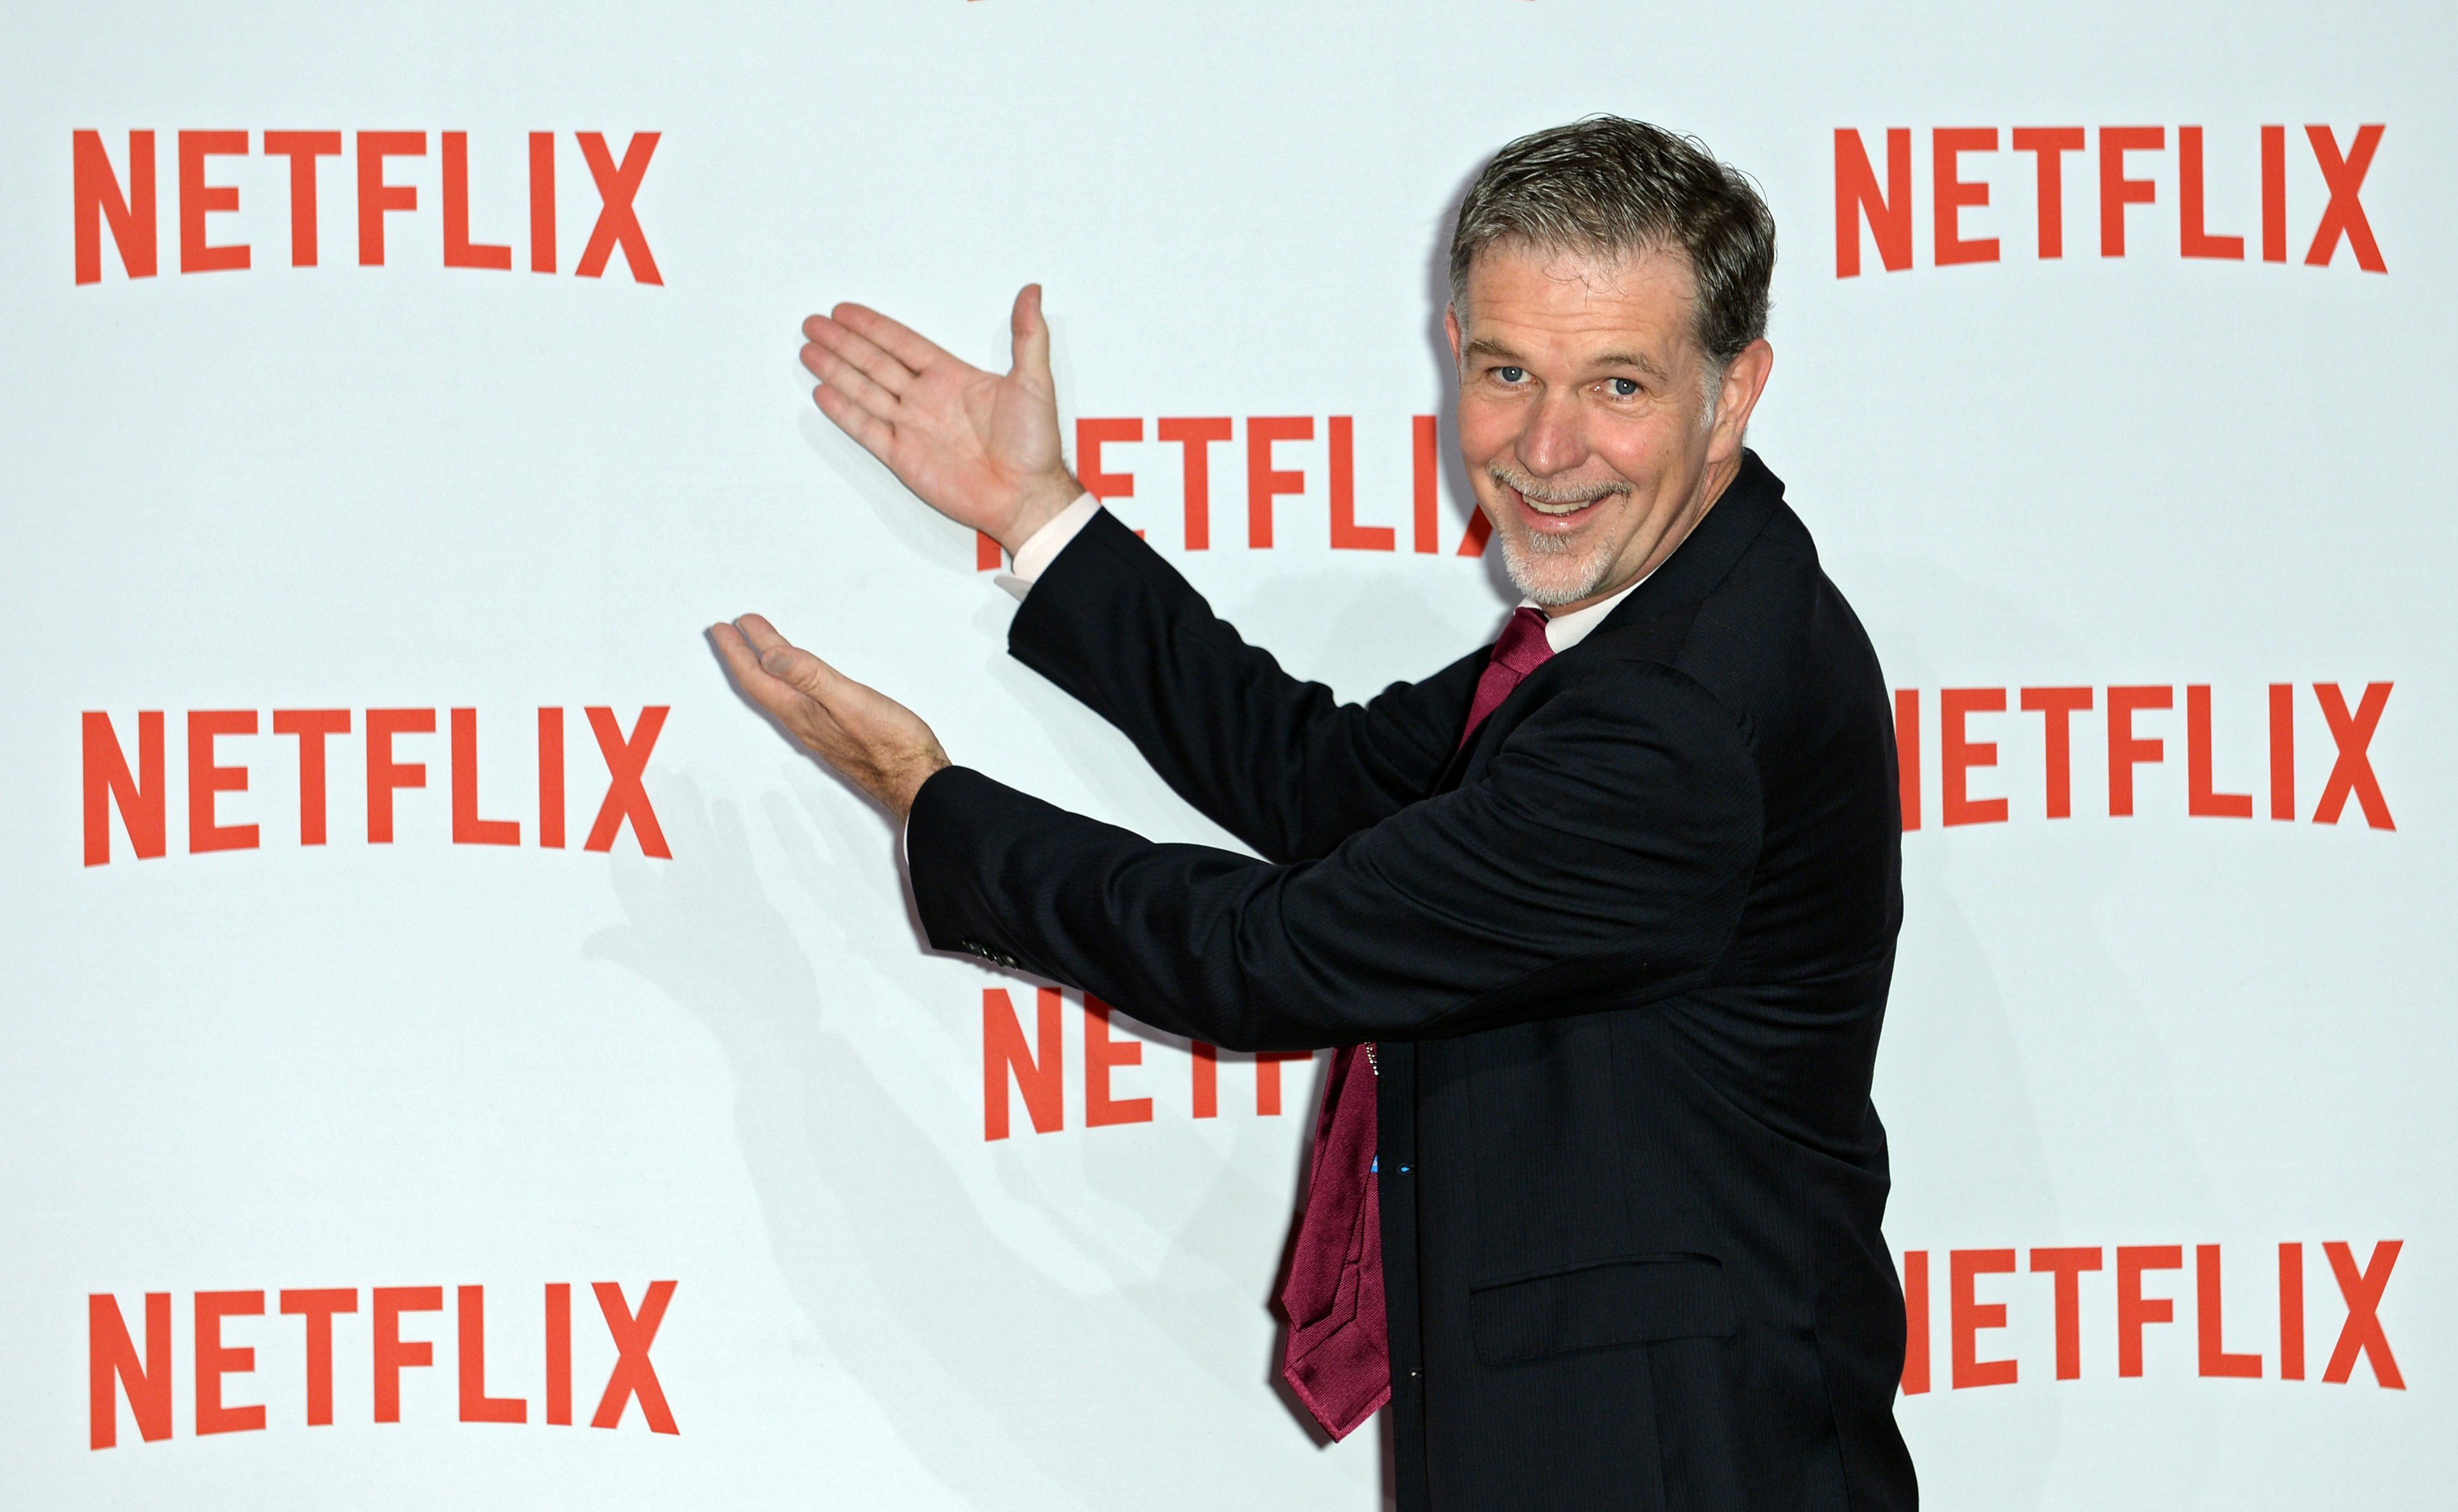 epa05090582 (FILE) A file picture dated 16 September 2014 of Netflix CEO Reed Hastings arrive for the Netflix party in Berlin, Germany. Video streamer Netflix on 06 January 2016 went live around the world, adding 130 new countries to its service and launching what Netflix chief executive Reed Hastings called a 'global internet TV network.' The announcement more than triples the number of countries where Netflix is available, from 60 to 190, including the potentially huge markets of India, Russia and South Korea. EPA/BRITTA PEDERSEN *** Local Caption *** 51572622